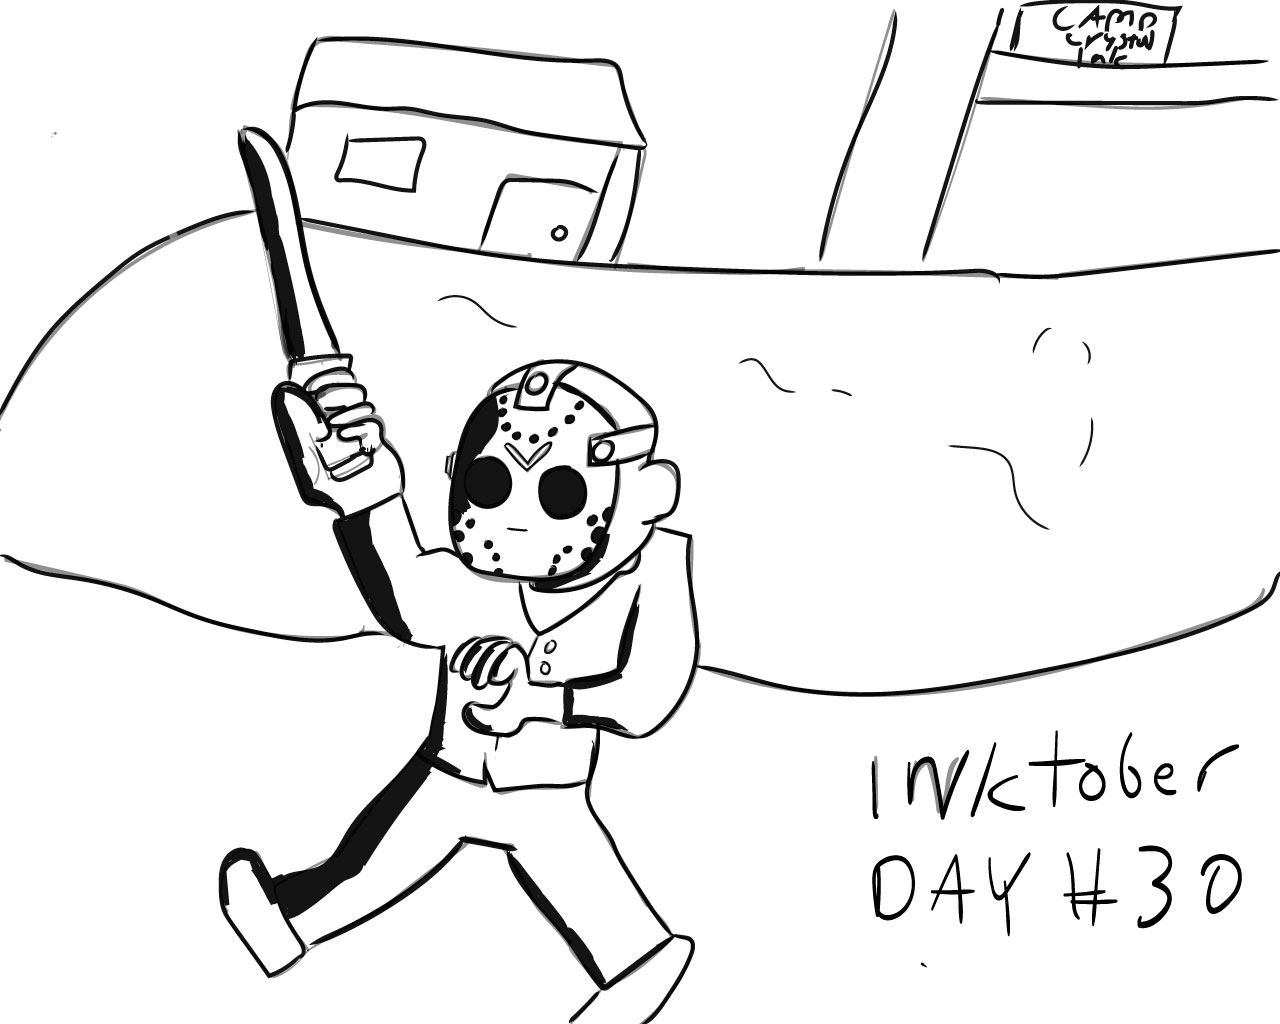 Inktober day #30: Other day at Camp Crystal lake